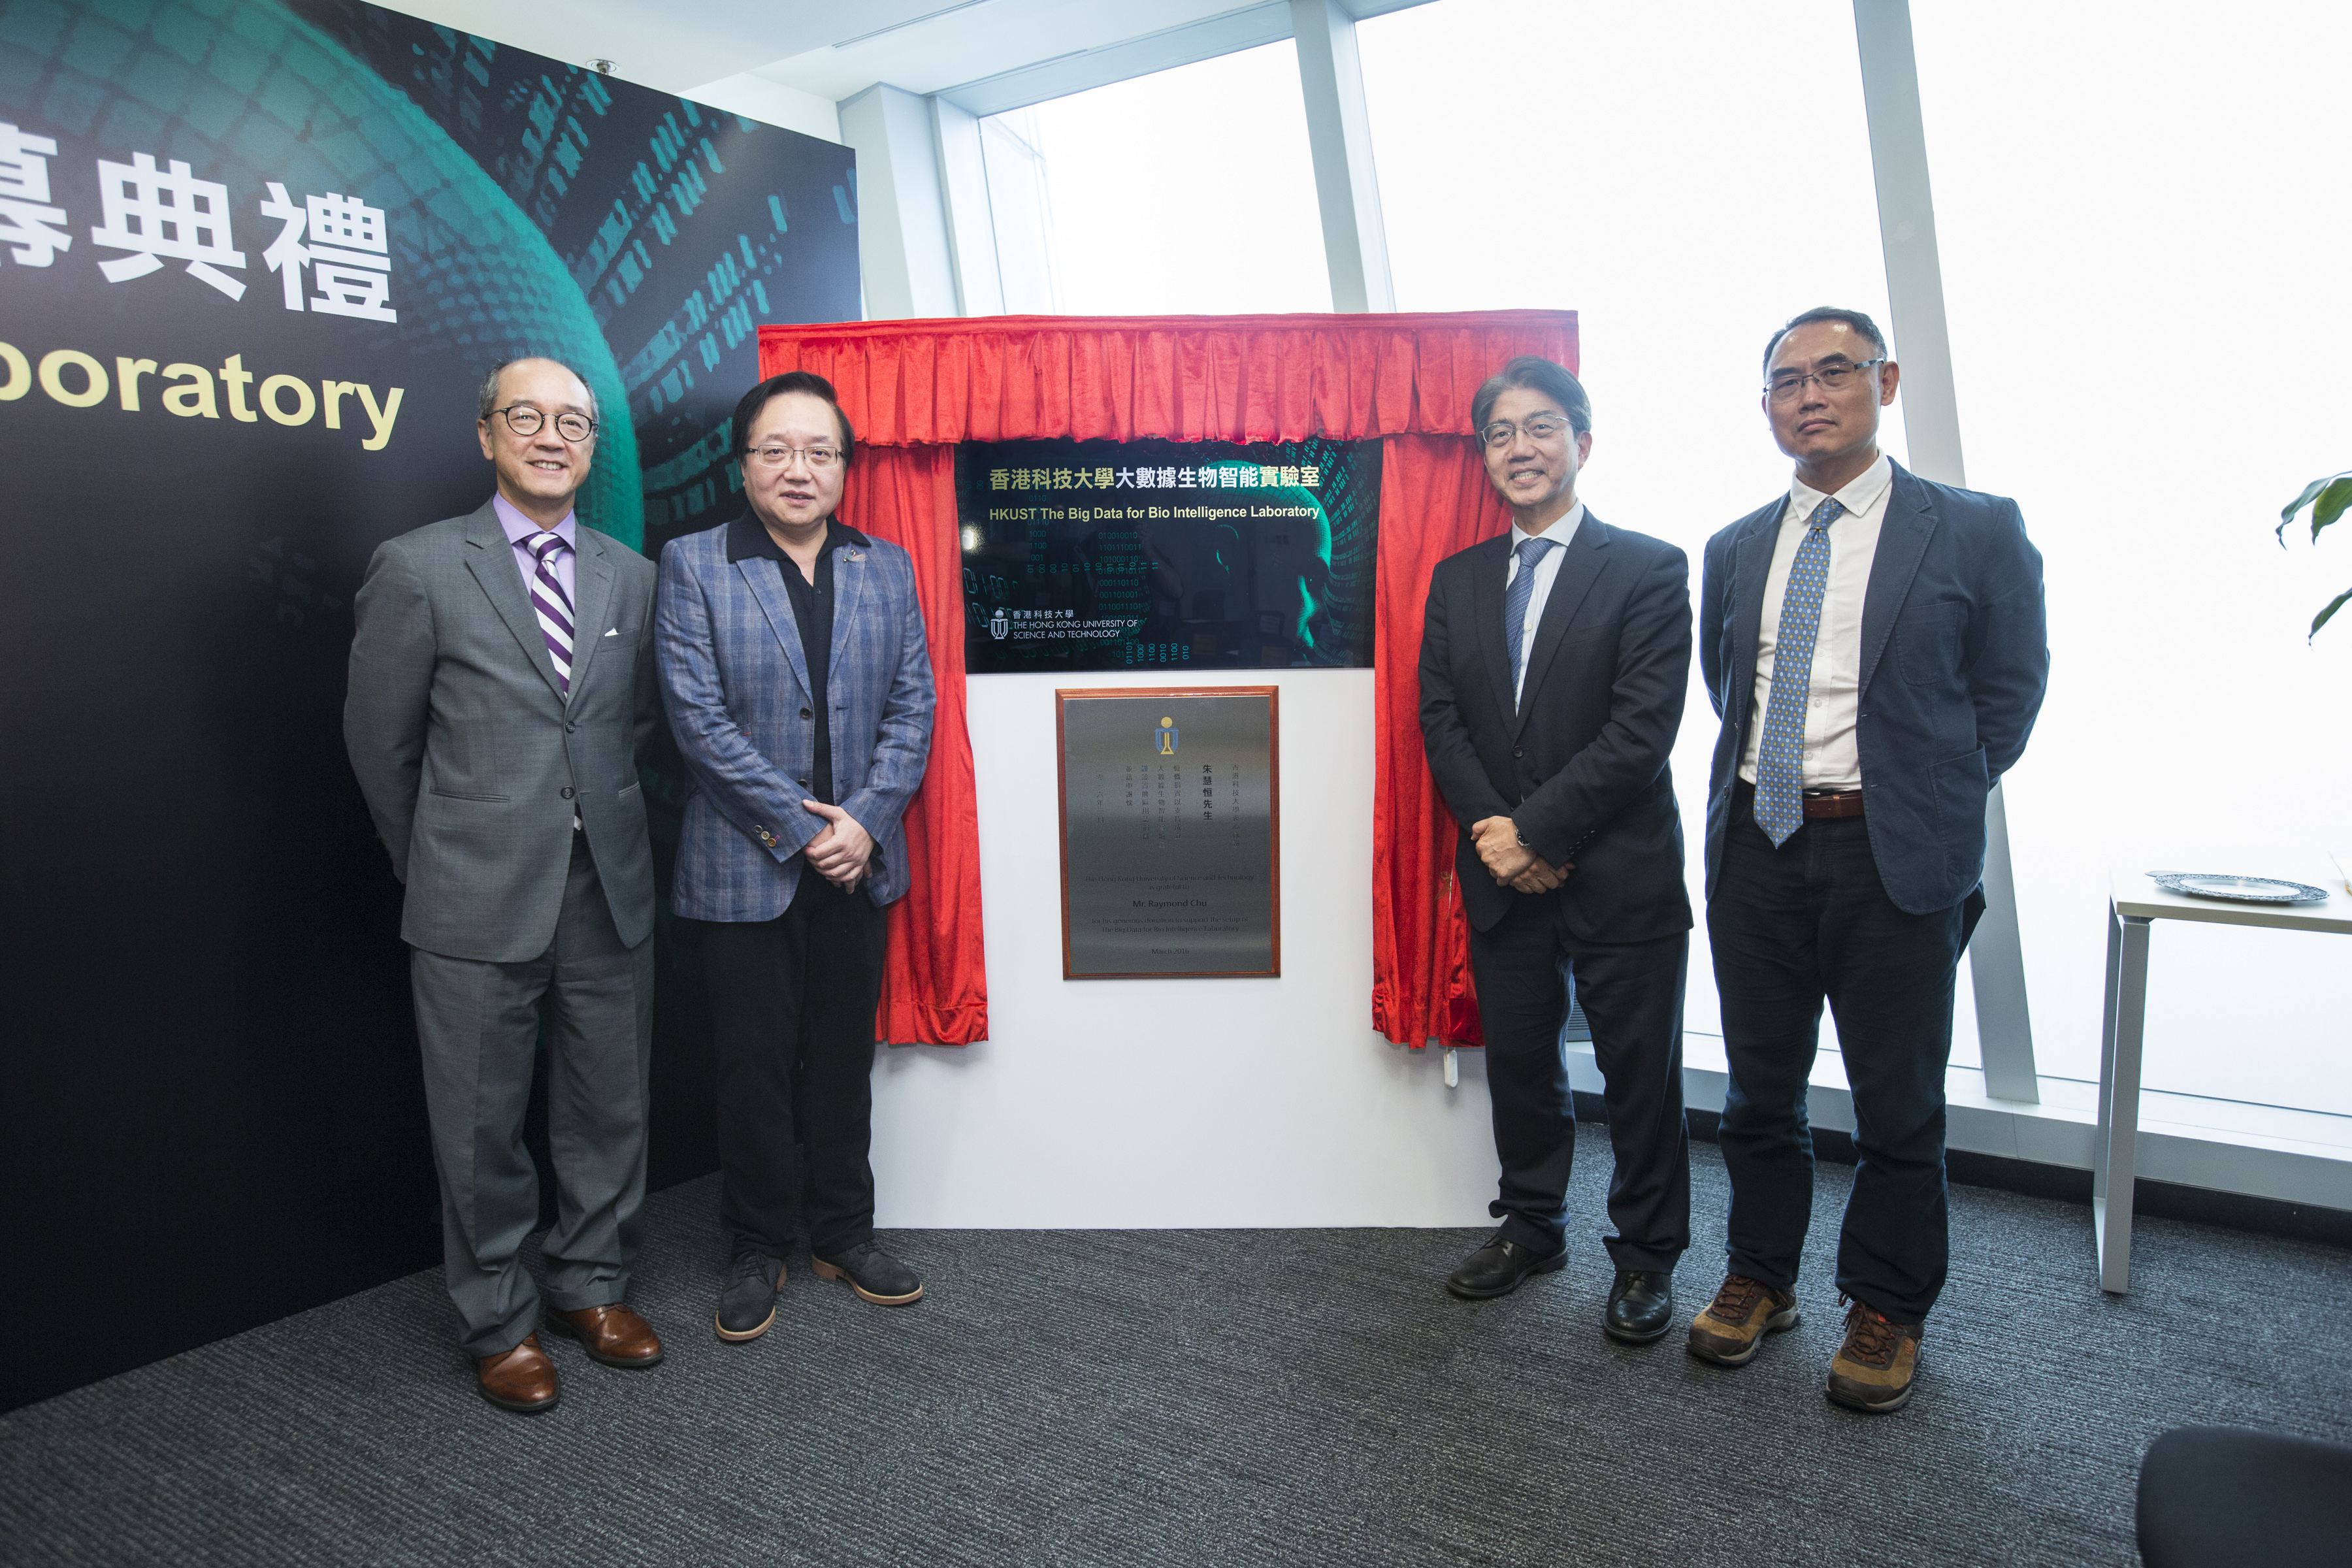 Officiating guests at the plaque unveiling ceremony: (from left to right) HKUST President Prof. Tony F CHAN; Mr Raymond CHU; Prof. Joseph LEE, Vice-President for Research and Graduate Studies; and Prof. QIANG Yang, New Bright Professor of Engineering, Chair Professor and Head of Department of Computer Science and Engineering.